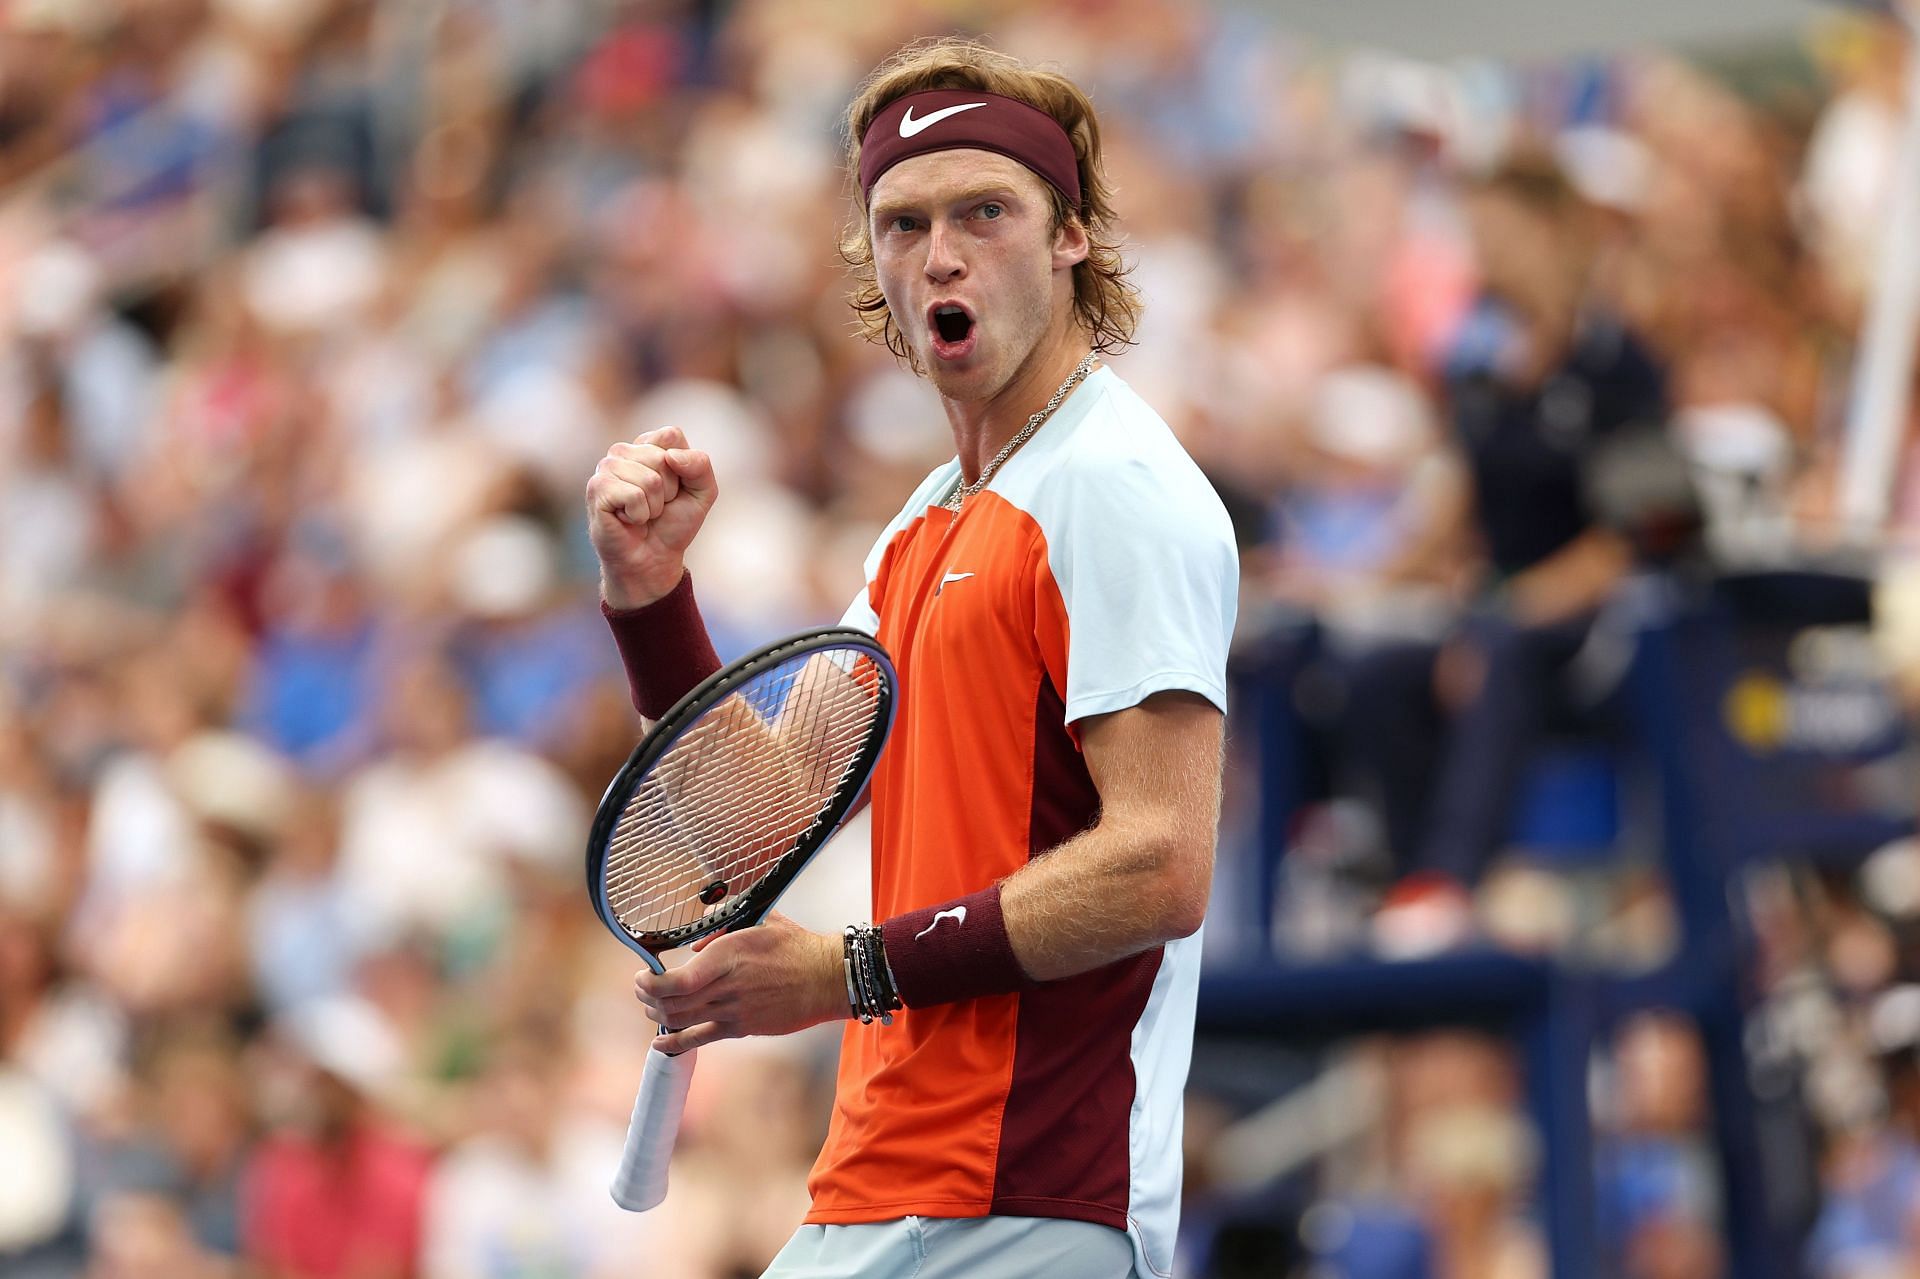 Rublev in action at the US Open